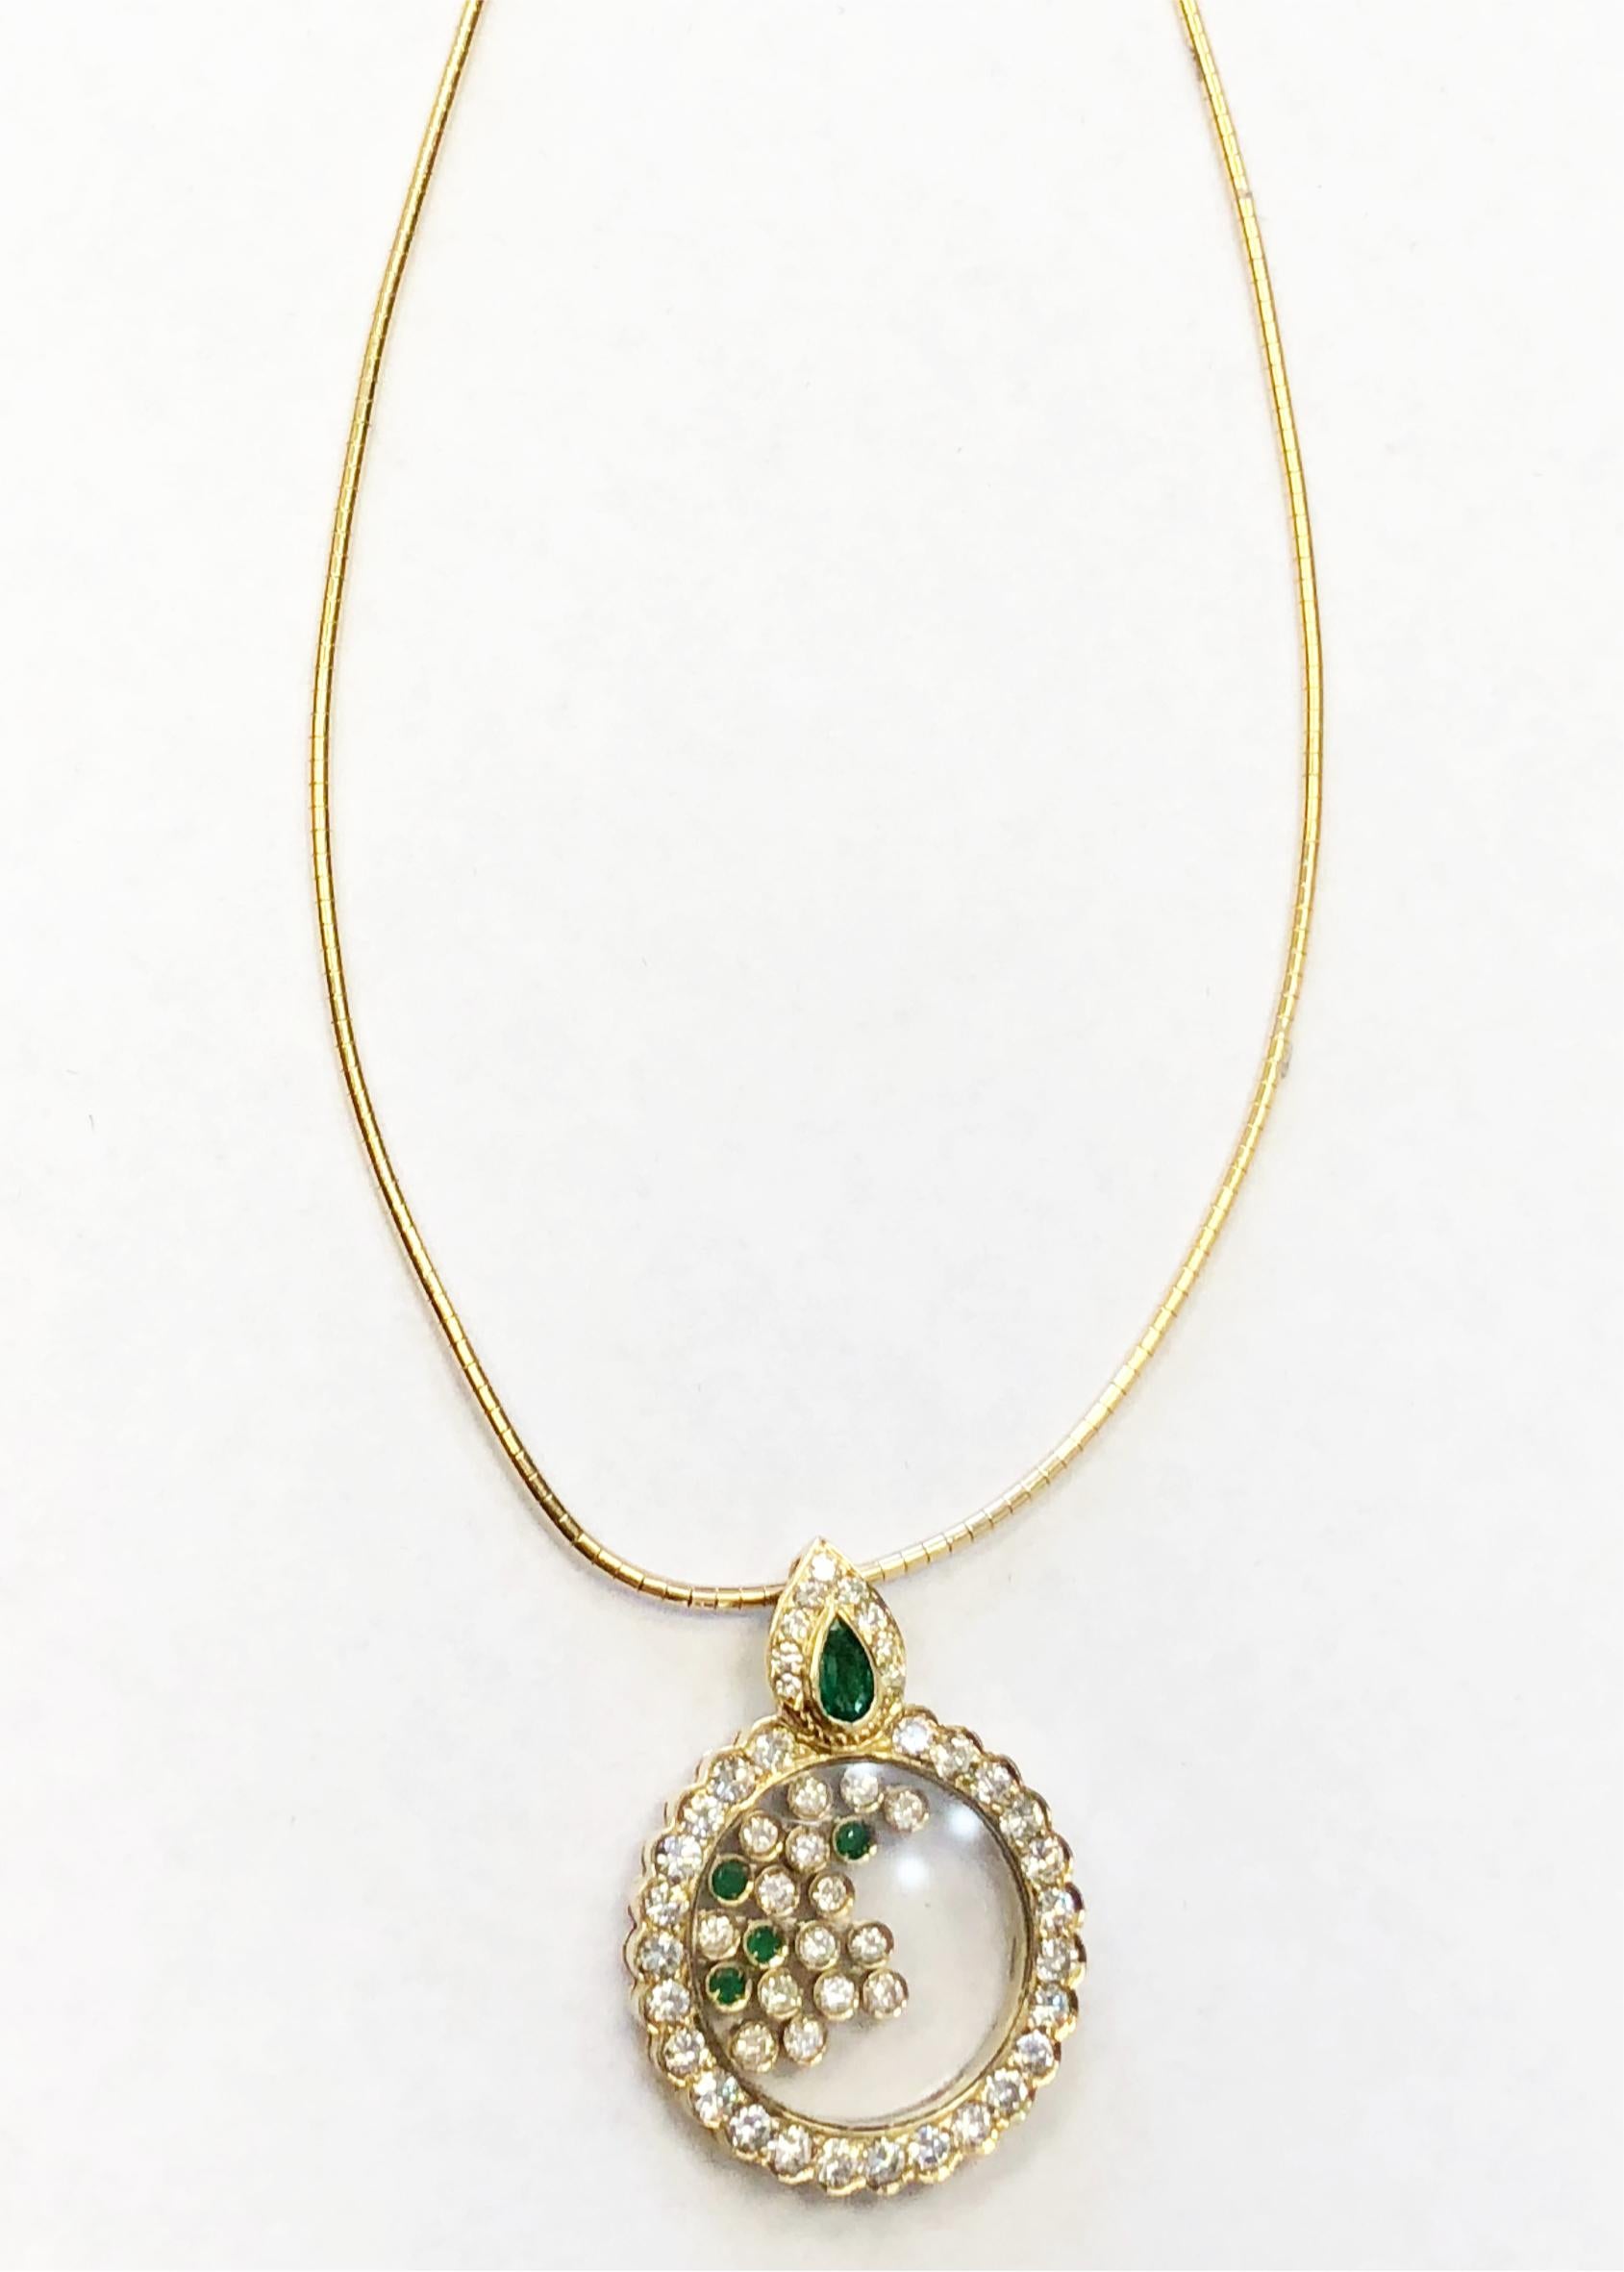 This gorgeous necklace showcases 0.60 carats of deep green emerald rounds and pear shape and 2.16 carats of white diamond rounds.  The free movement of the bezeled stones inside of a round diamond encasing makes this piece whimsical and fun.  The